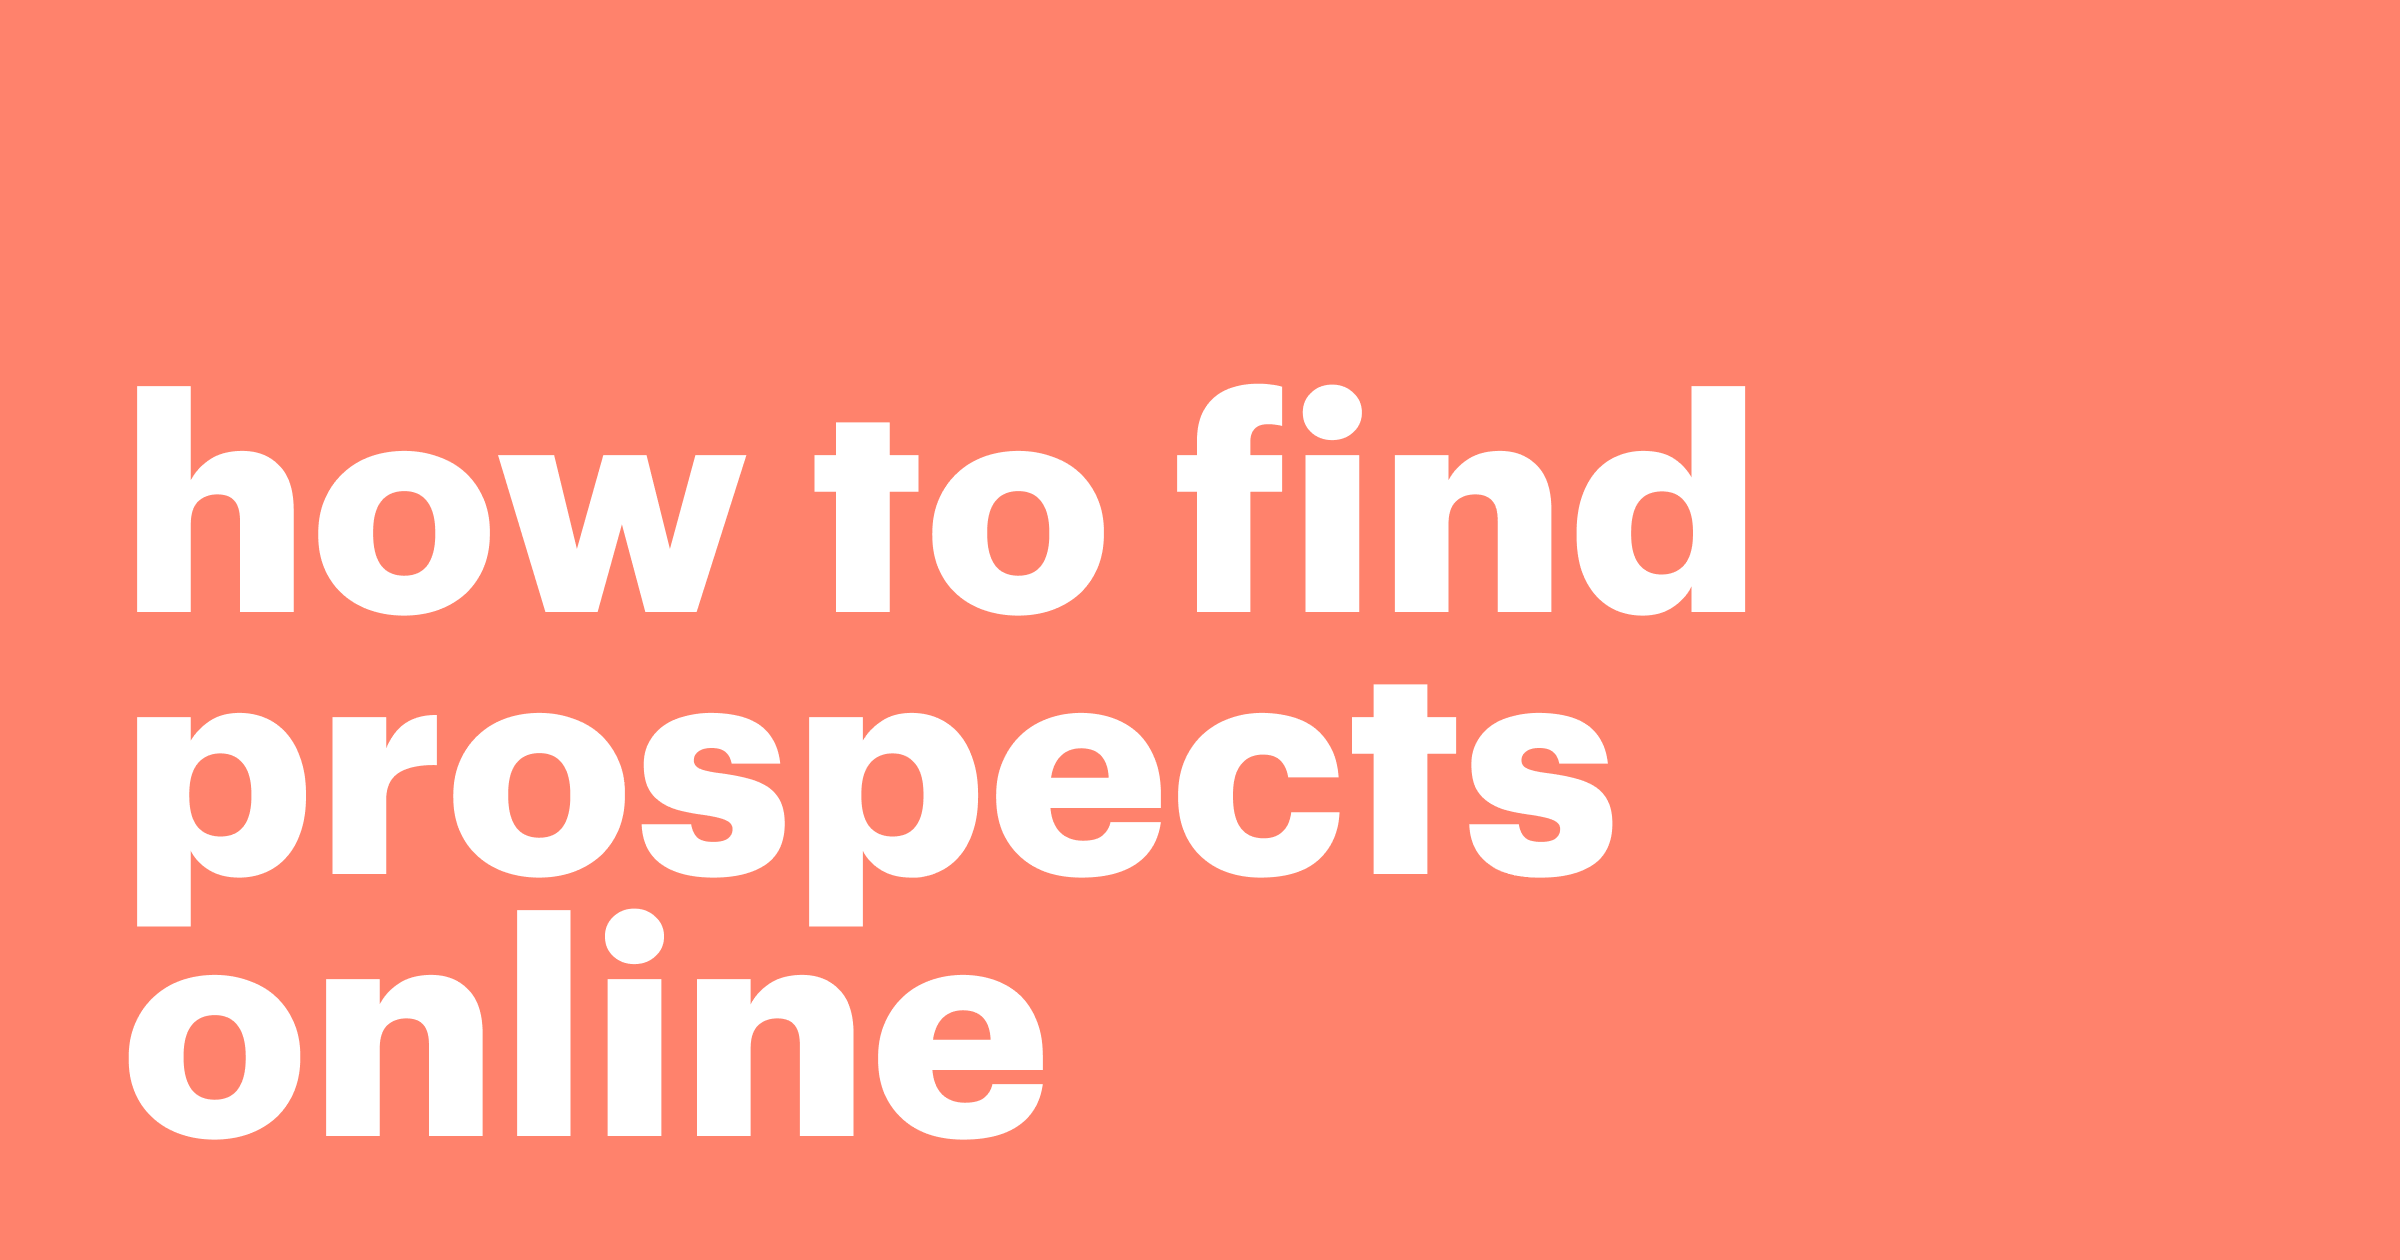 6 Channels to find your new prospects online